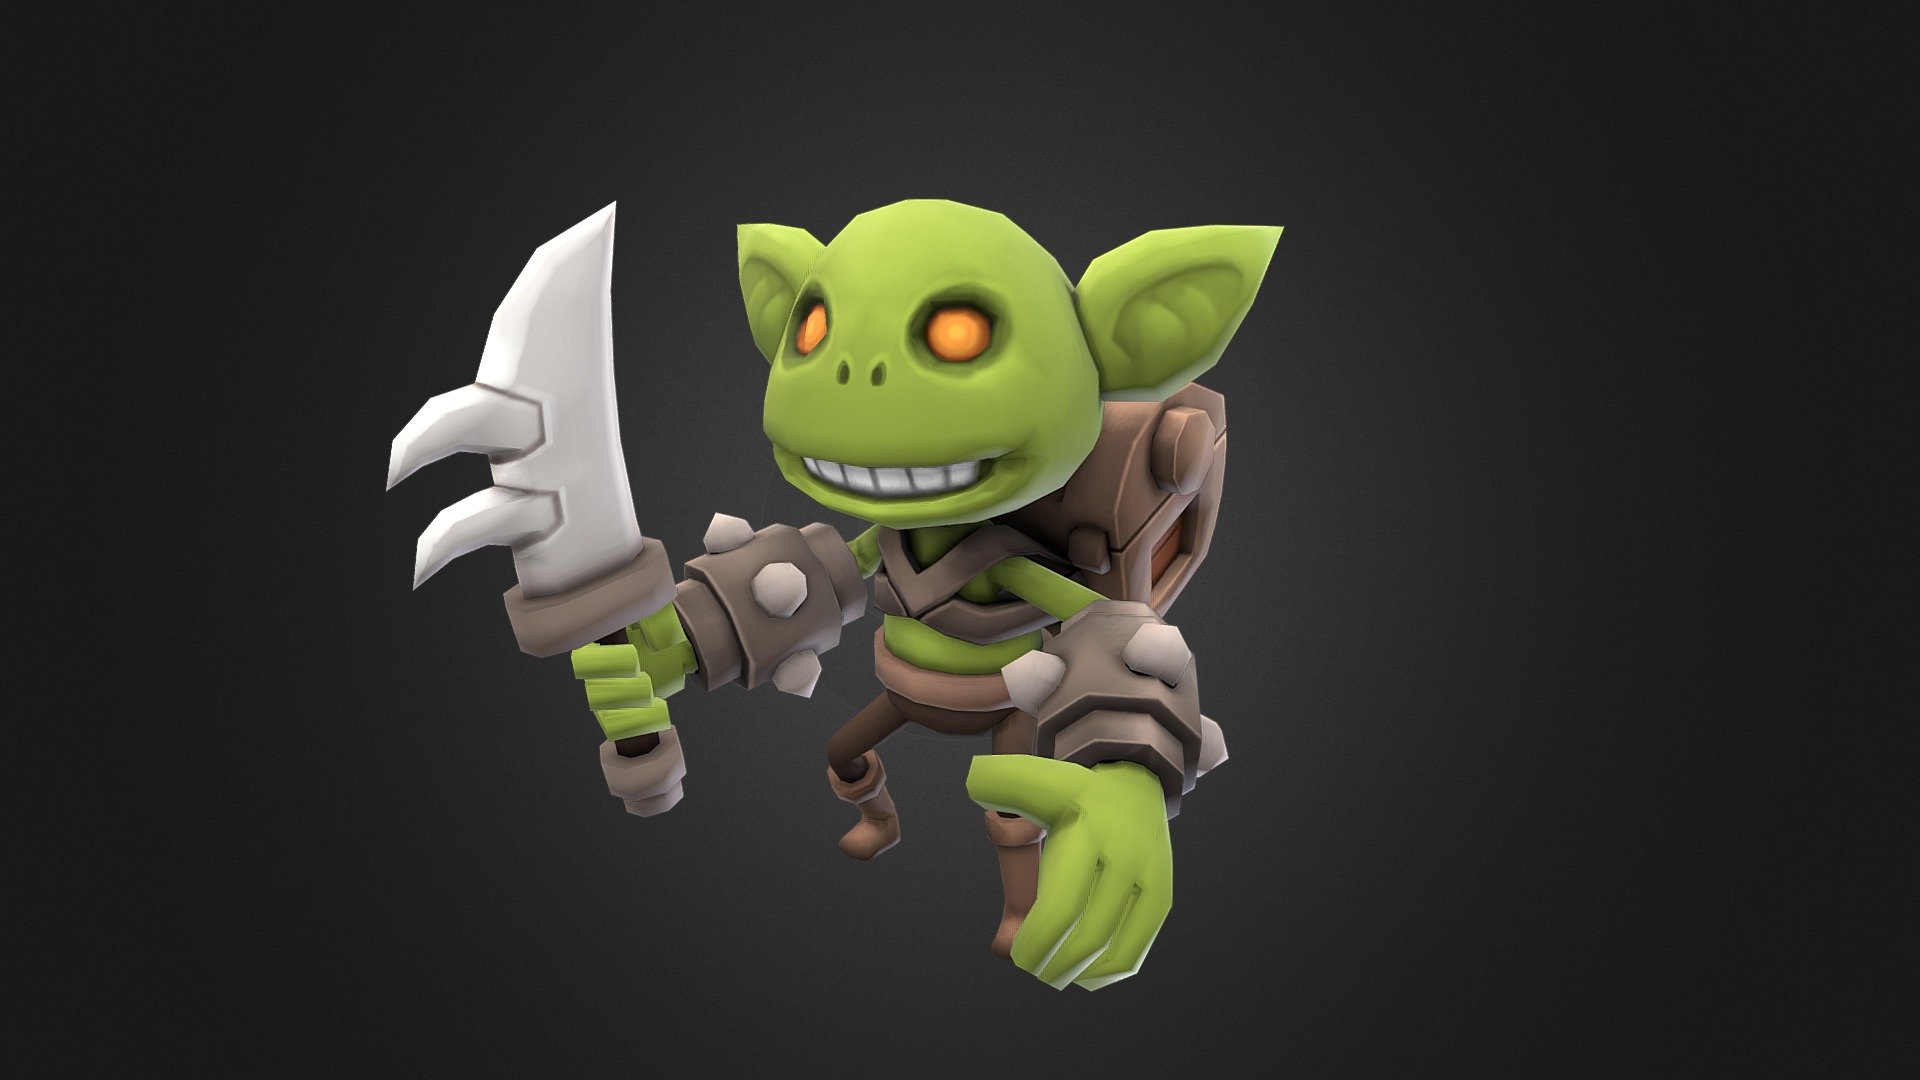 Supported Unity versions 2018.4.8 or higher



Goblin (1890 vertex)



6 colors textures (2048x2048)



10 basic animations



Idle / Walk / Run / Attack x3 / Damage / Stunned / Die / GetUp



Animation Preview

https://youtu.be/6q9vhaYwvv4
 - Poly HP - Goblin - Buy Royalty Free 3D model by Downrain DC (@downraindc3d) 3d model